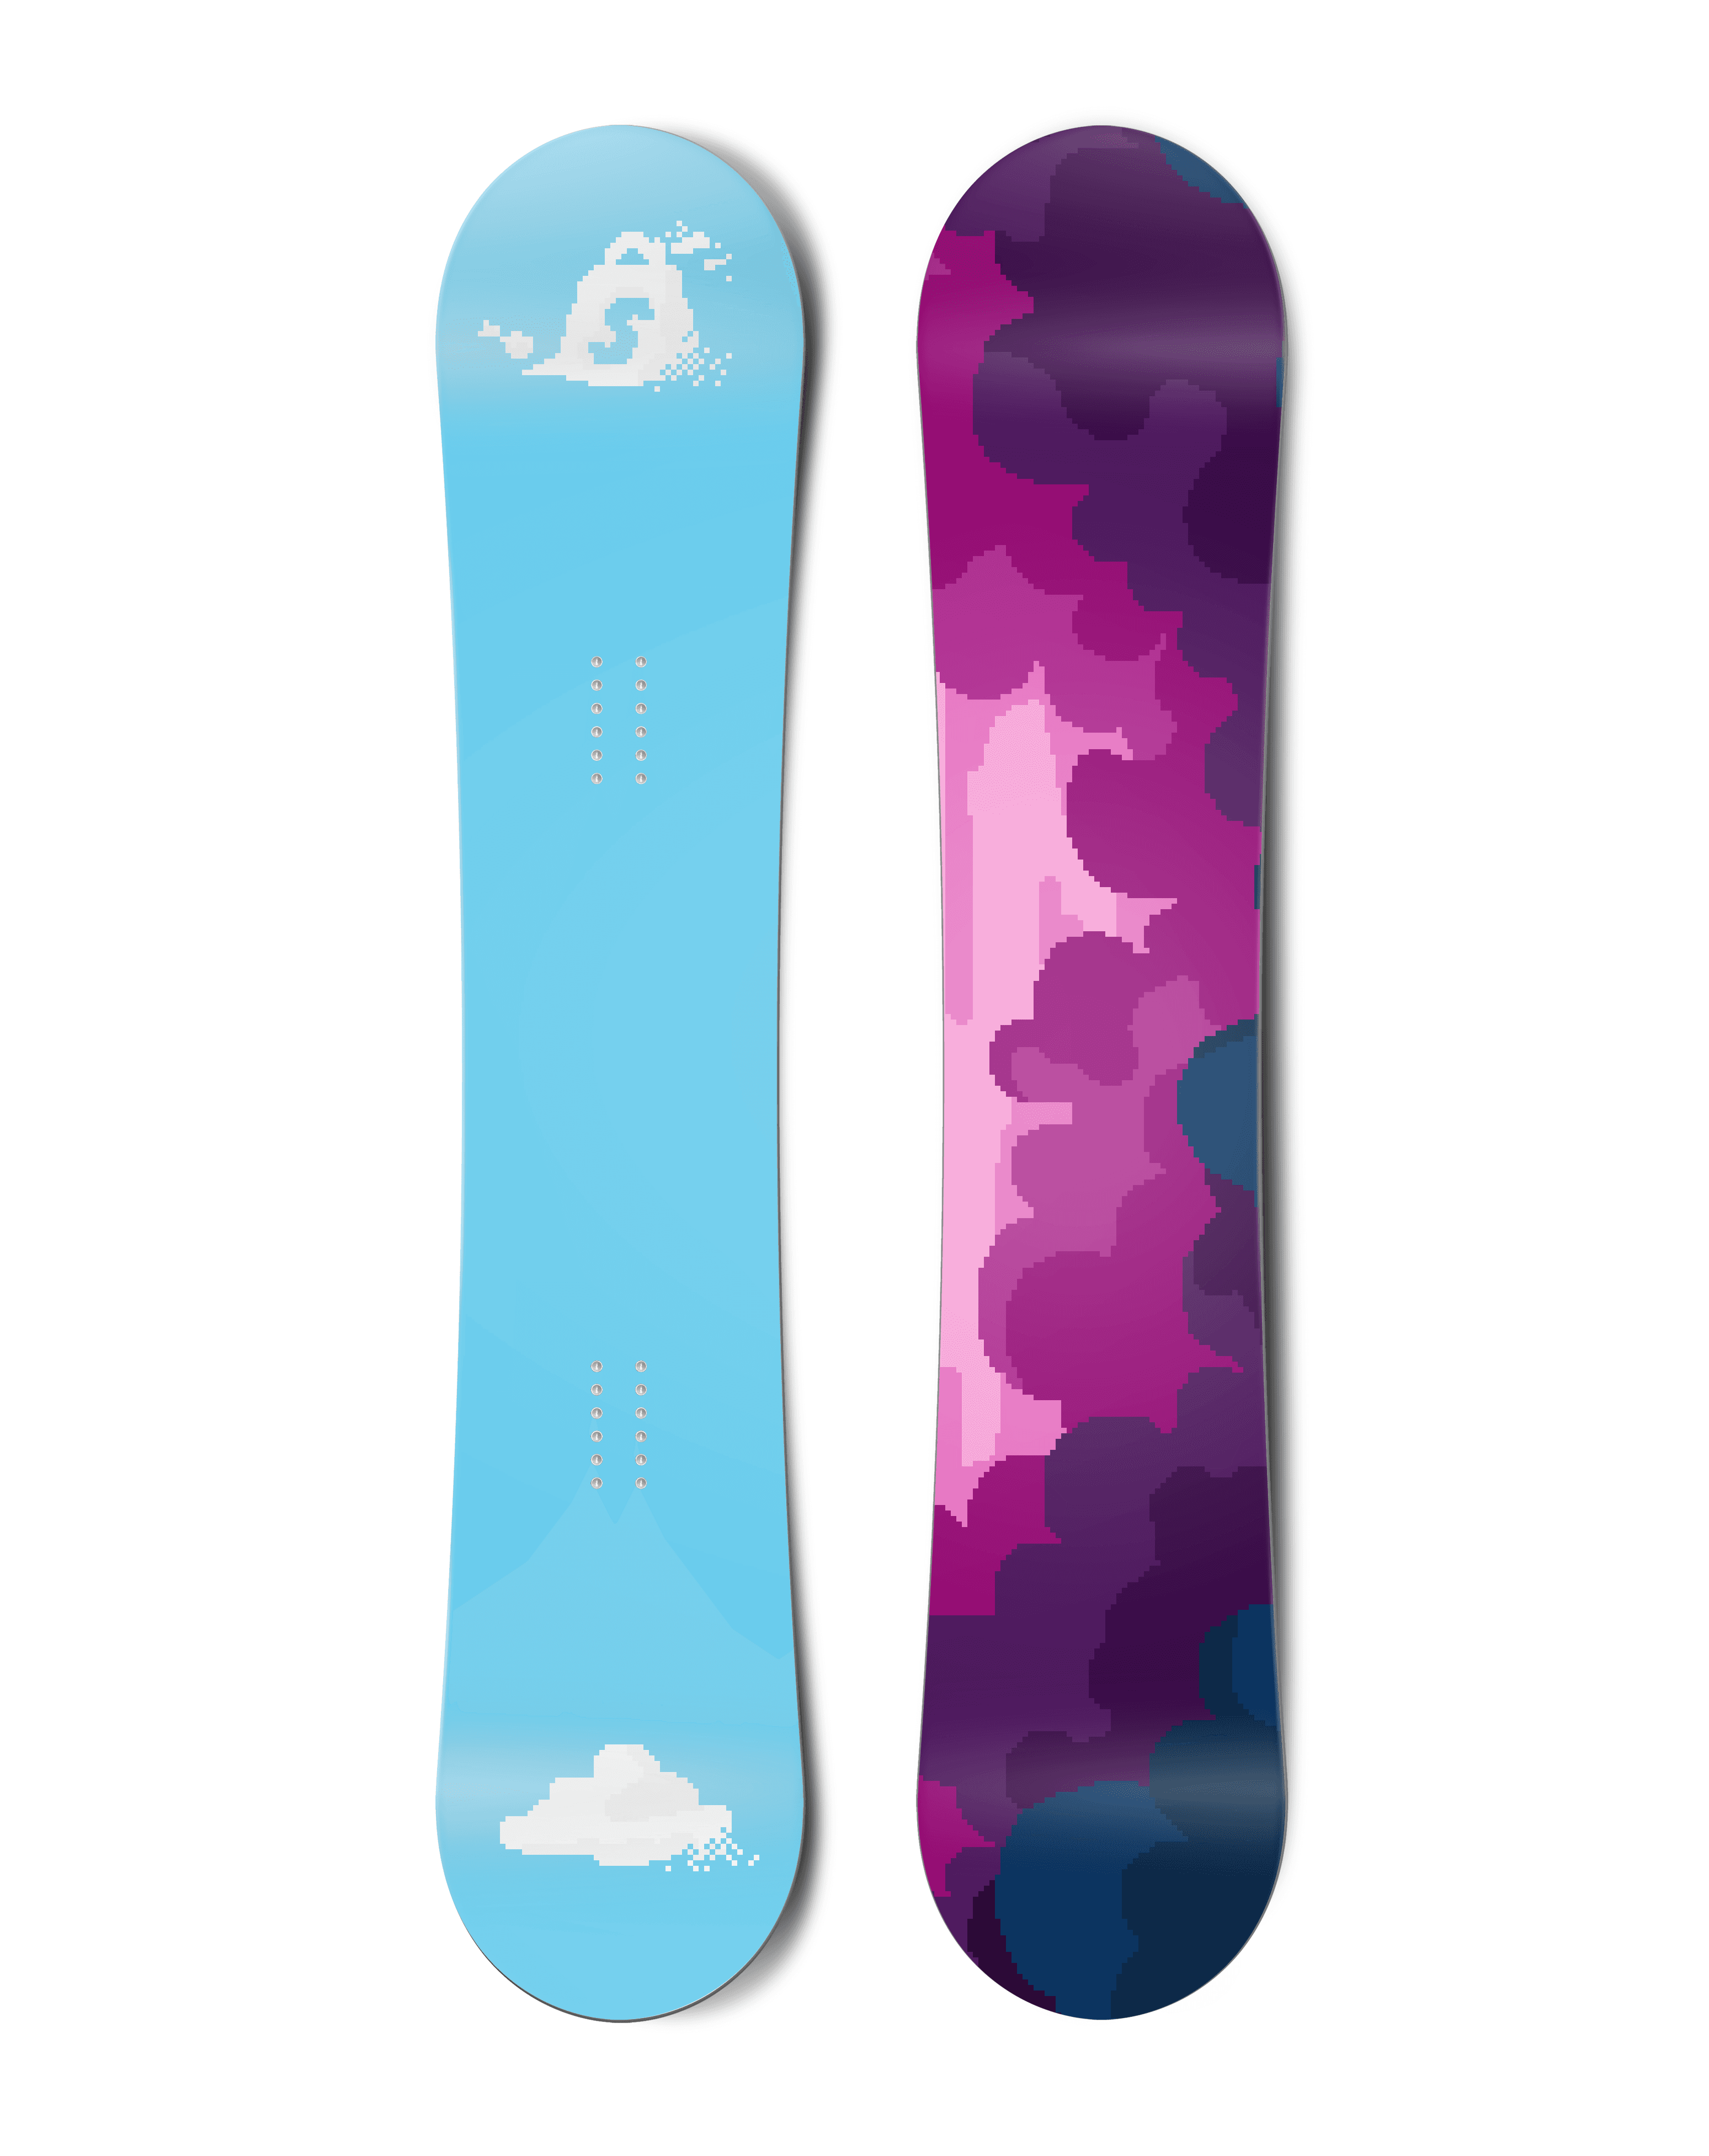 Top and bottom view of a snowboard. The top view shows pixelated clouds, with the top-most one being
        the shape of the Shopify bag logo. The bottom view has a pixelated cloudy sky with blue, pink and purple
        colours.